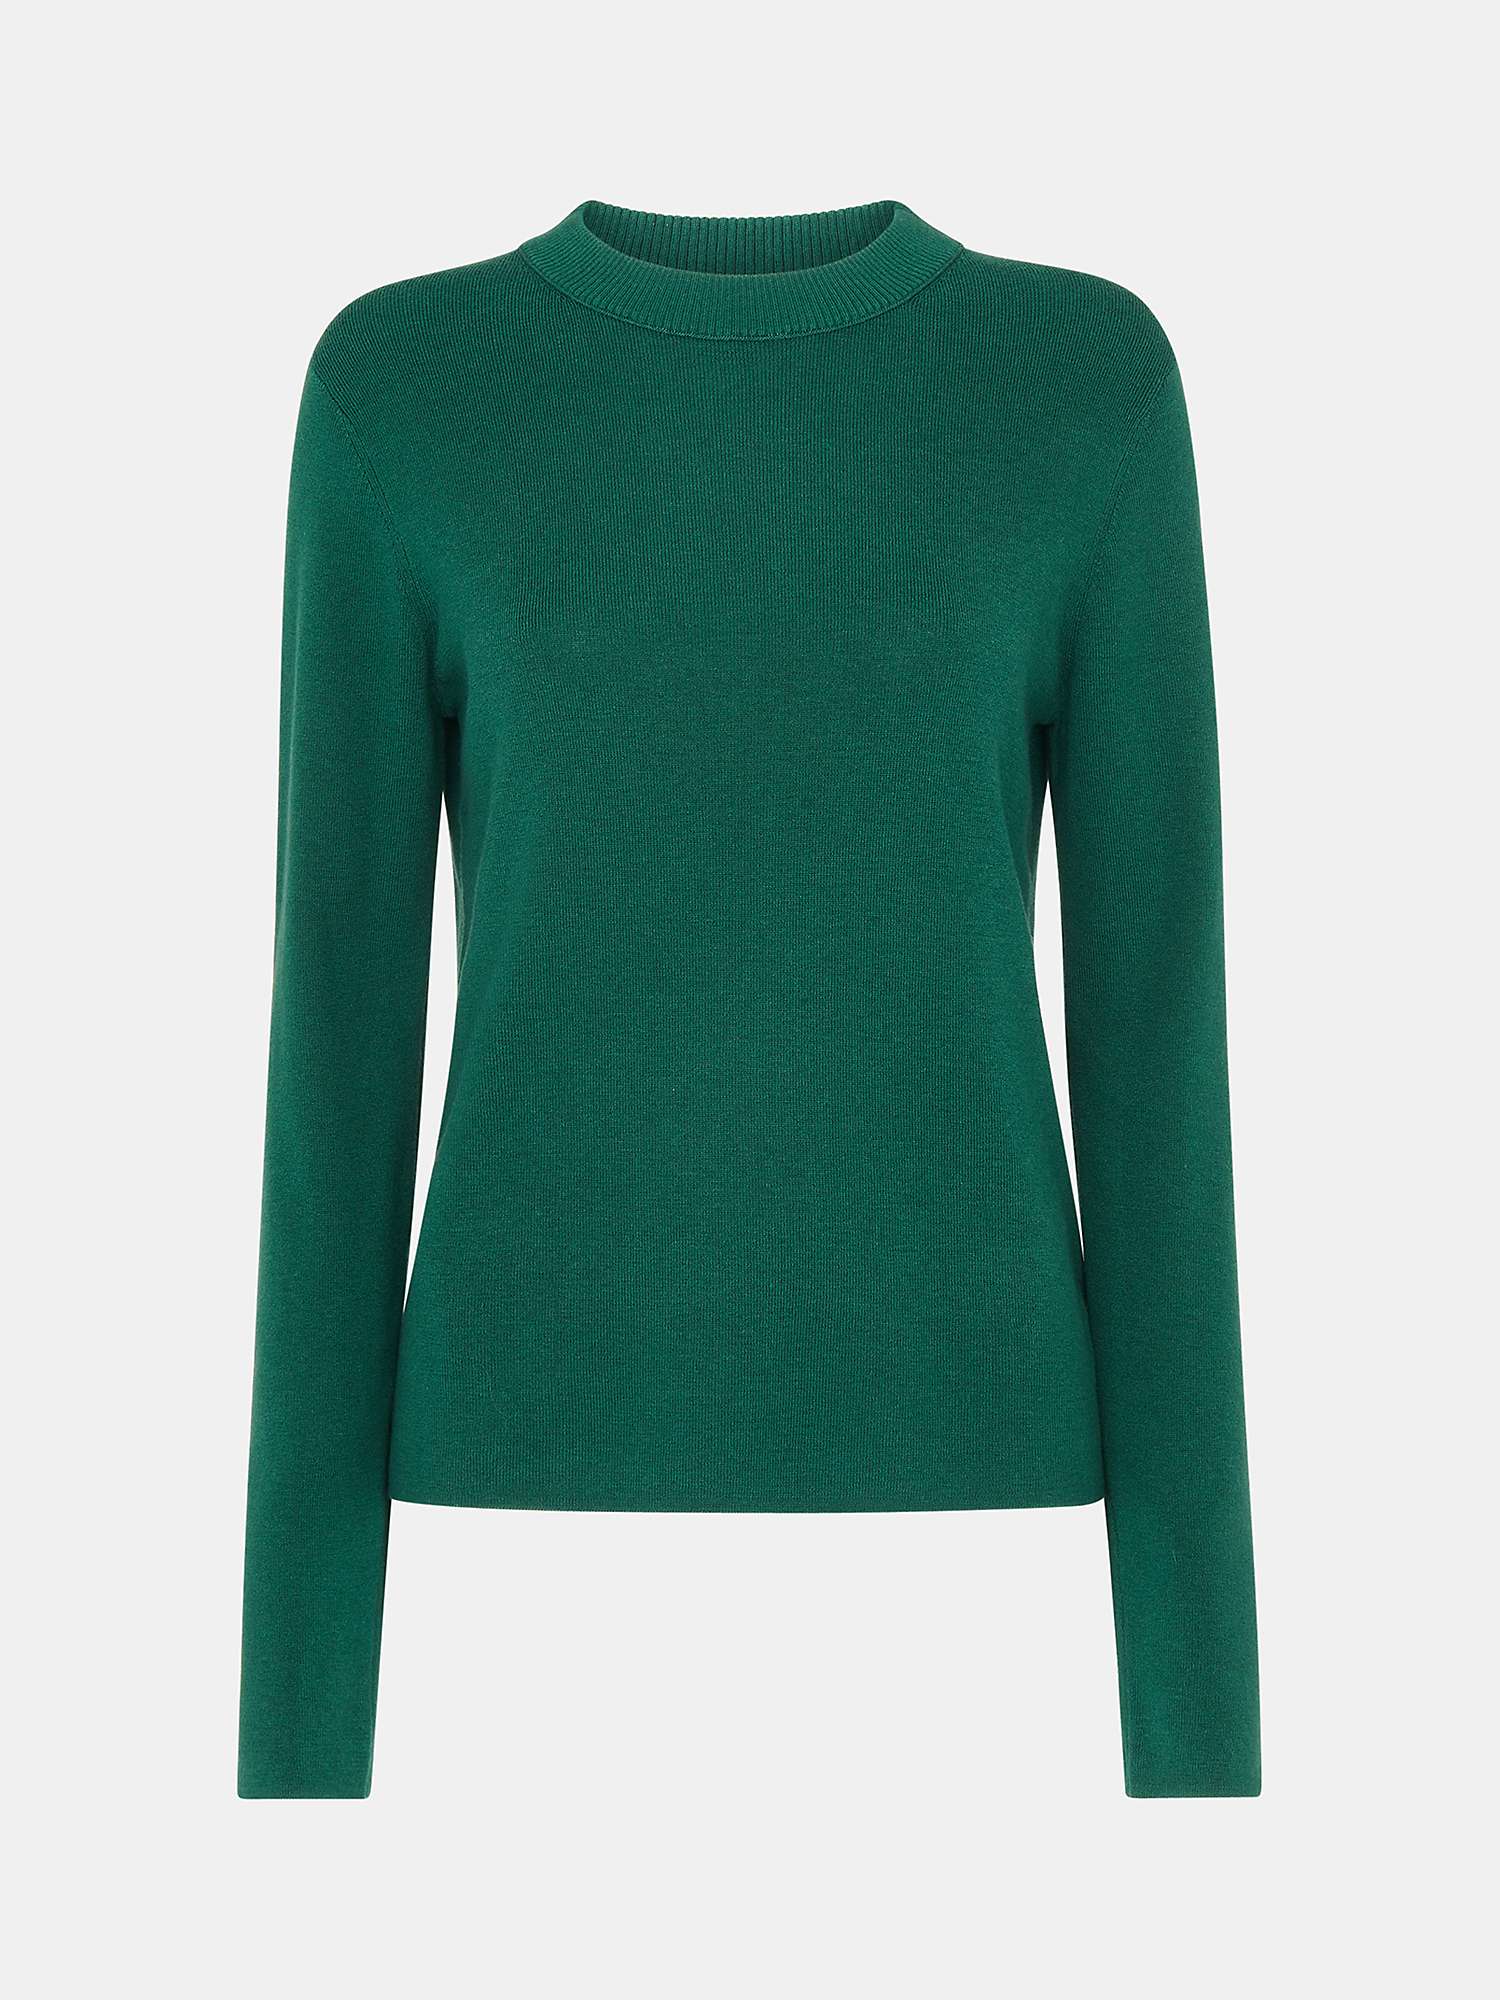 Buy Whistles Mia Fitted Crew Neck Jumper, Dark Green Online at johnlewis.com